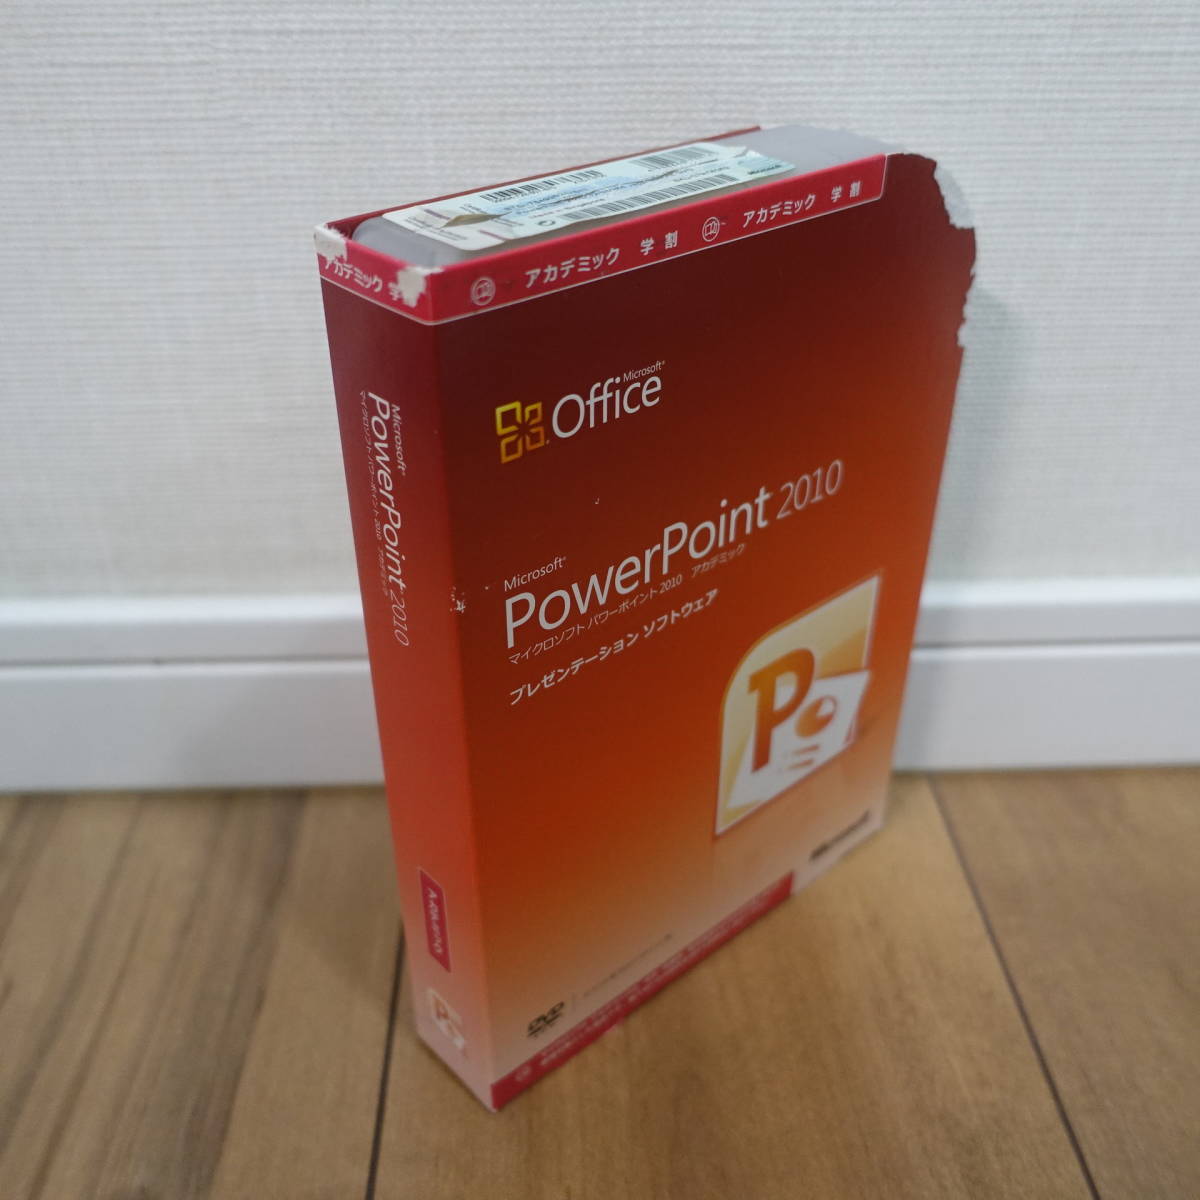 Microsoft PowerPoint 2010 general product version package version 